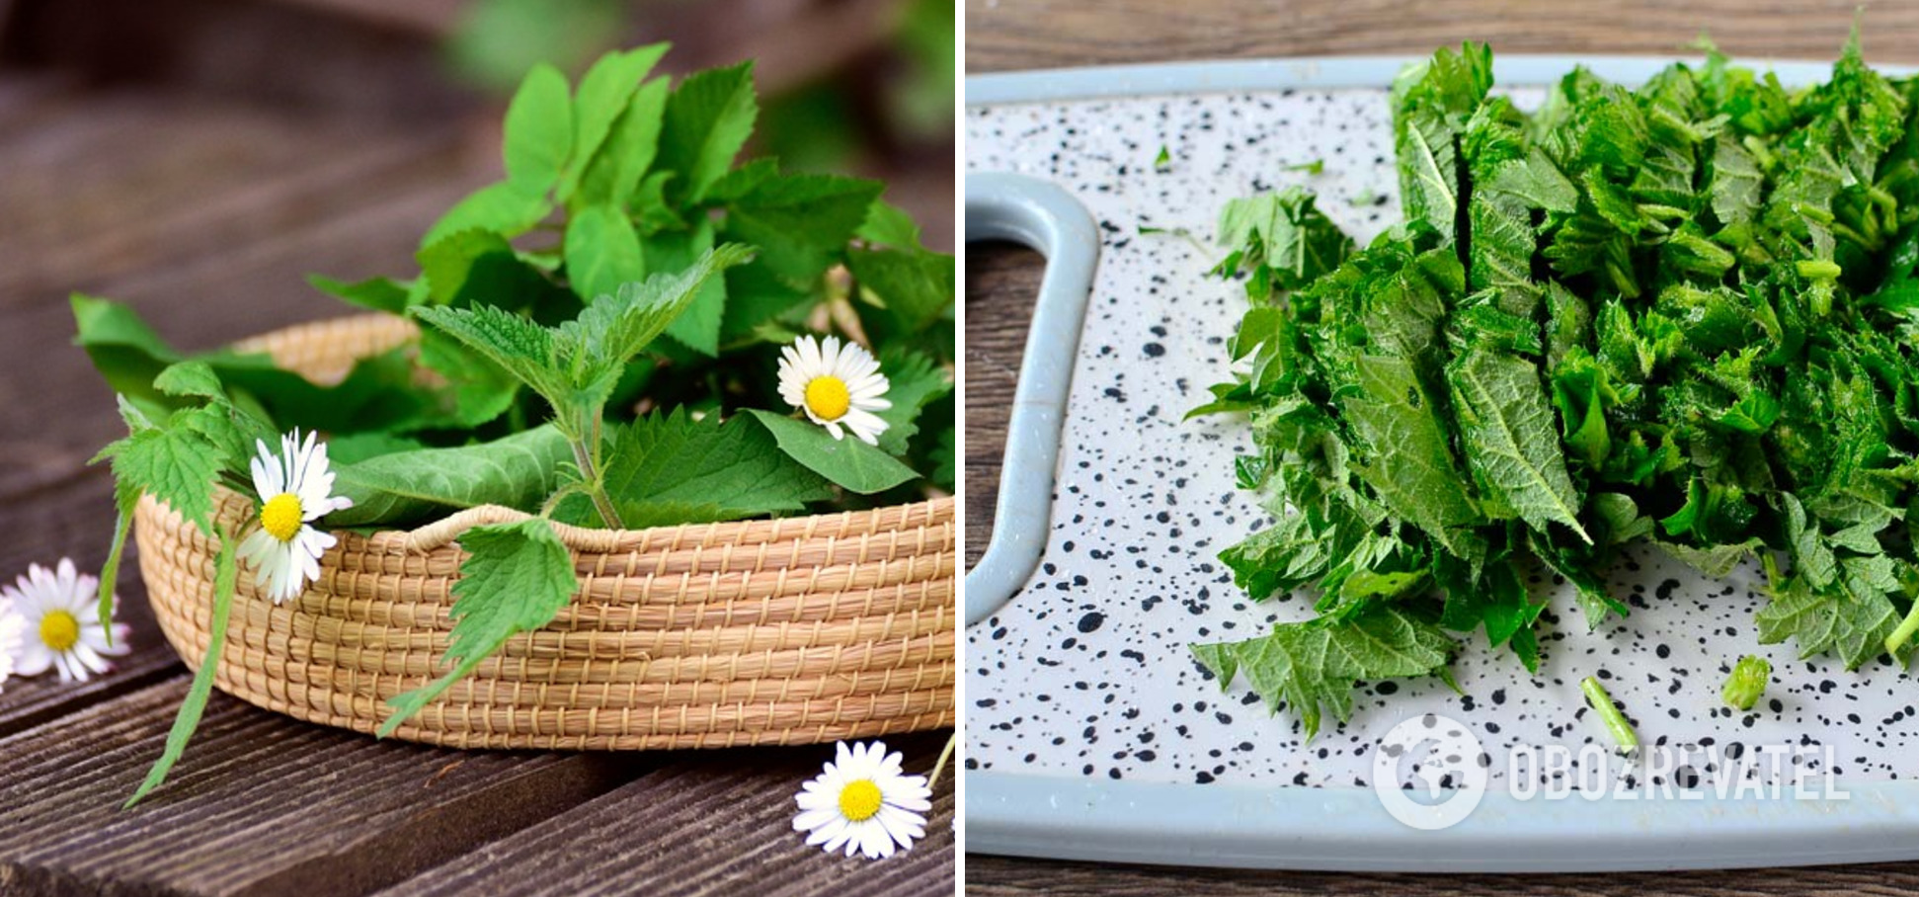 What to make from nettles